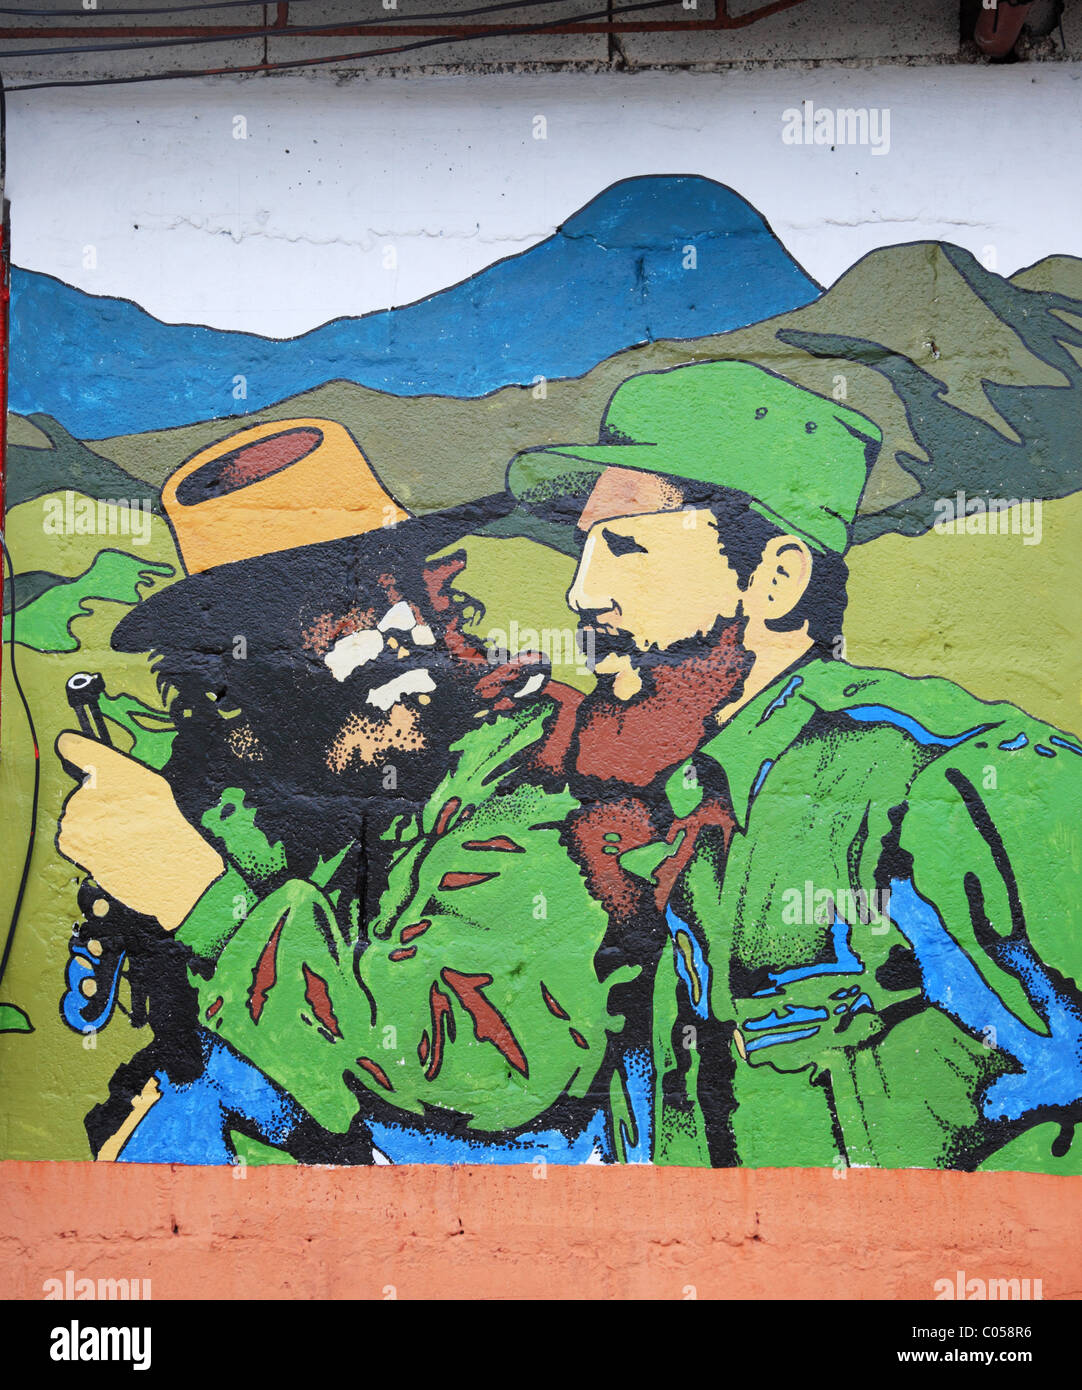 Che Guevara and El Castro painted on a wall in Cuba Stock Photo